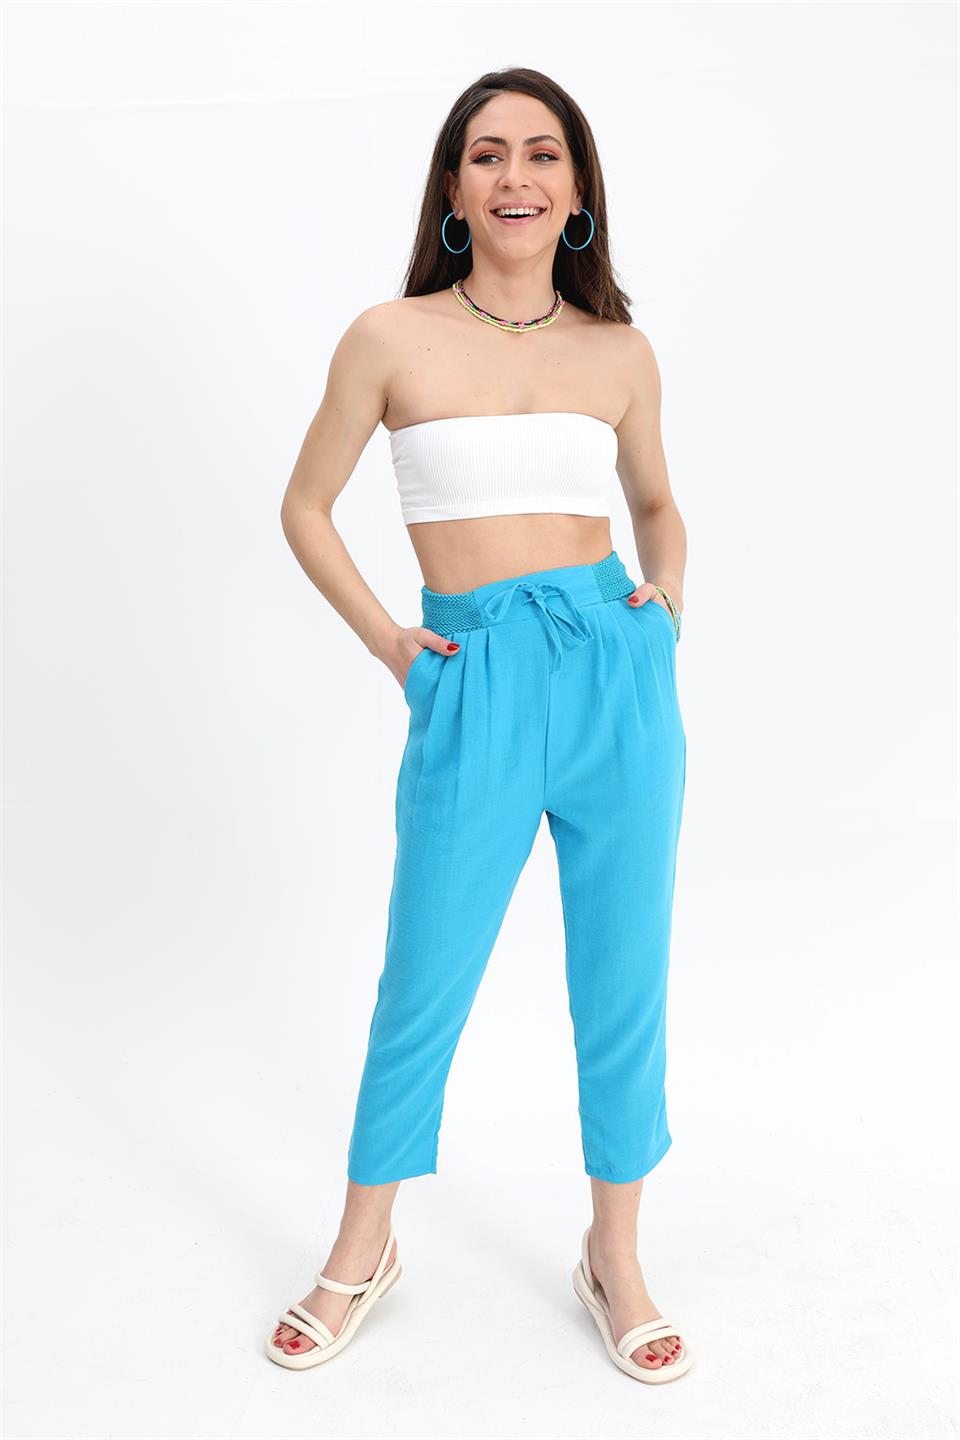 Women's Trousers Waist Elastic Corded Cotton Fabric - Blue - STREETMODE™